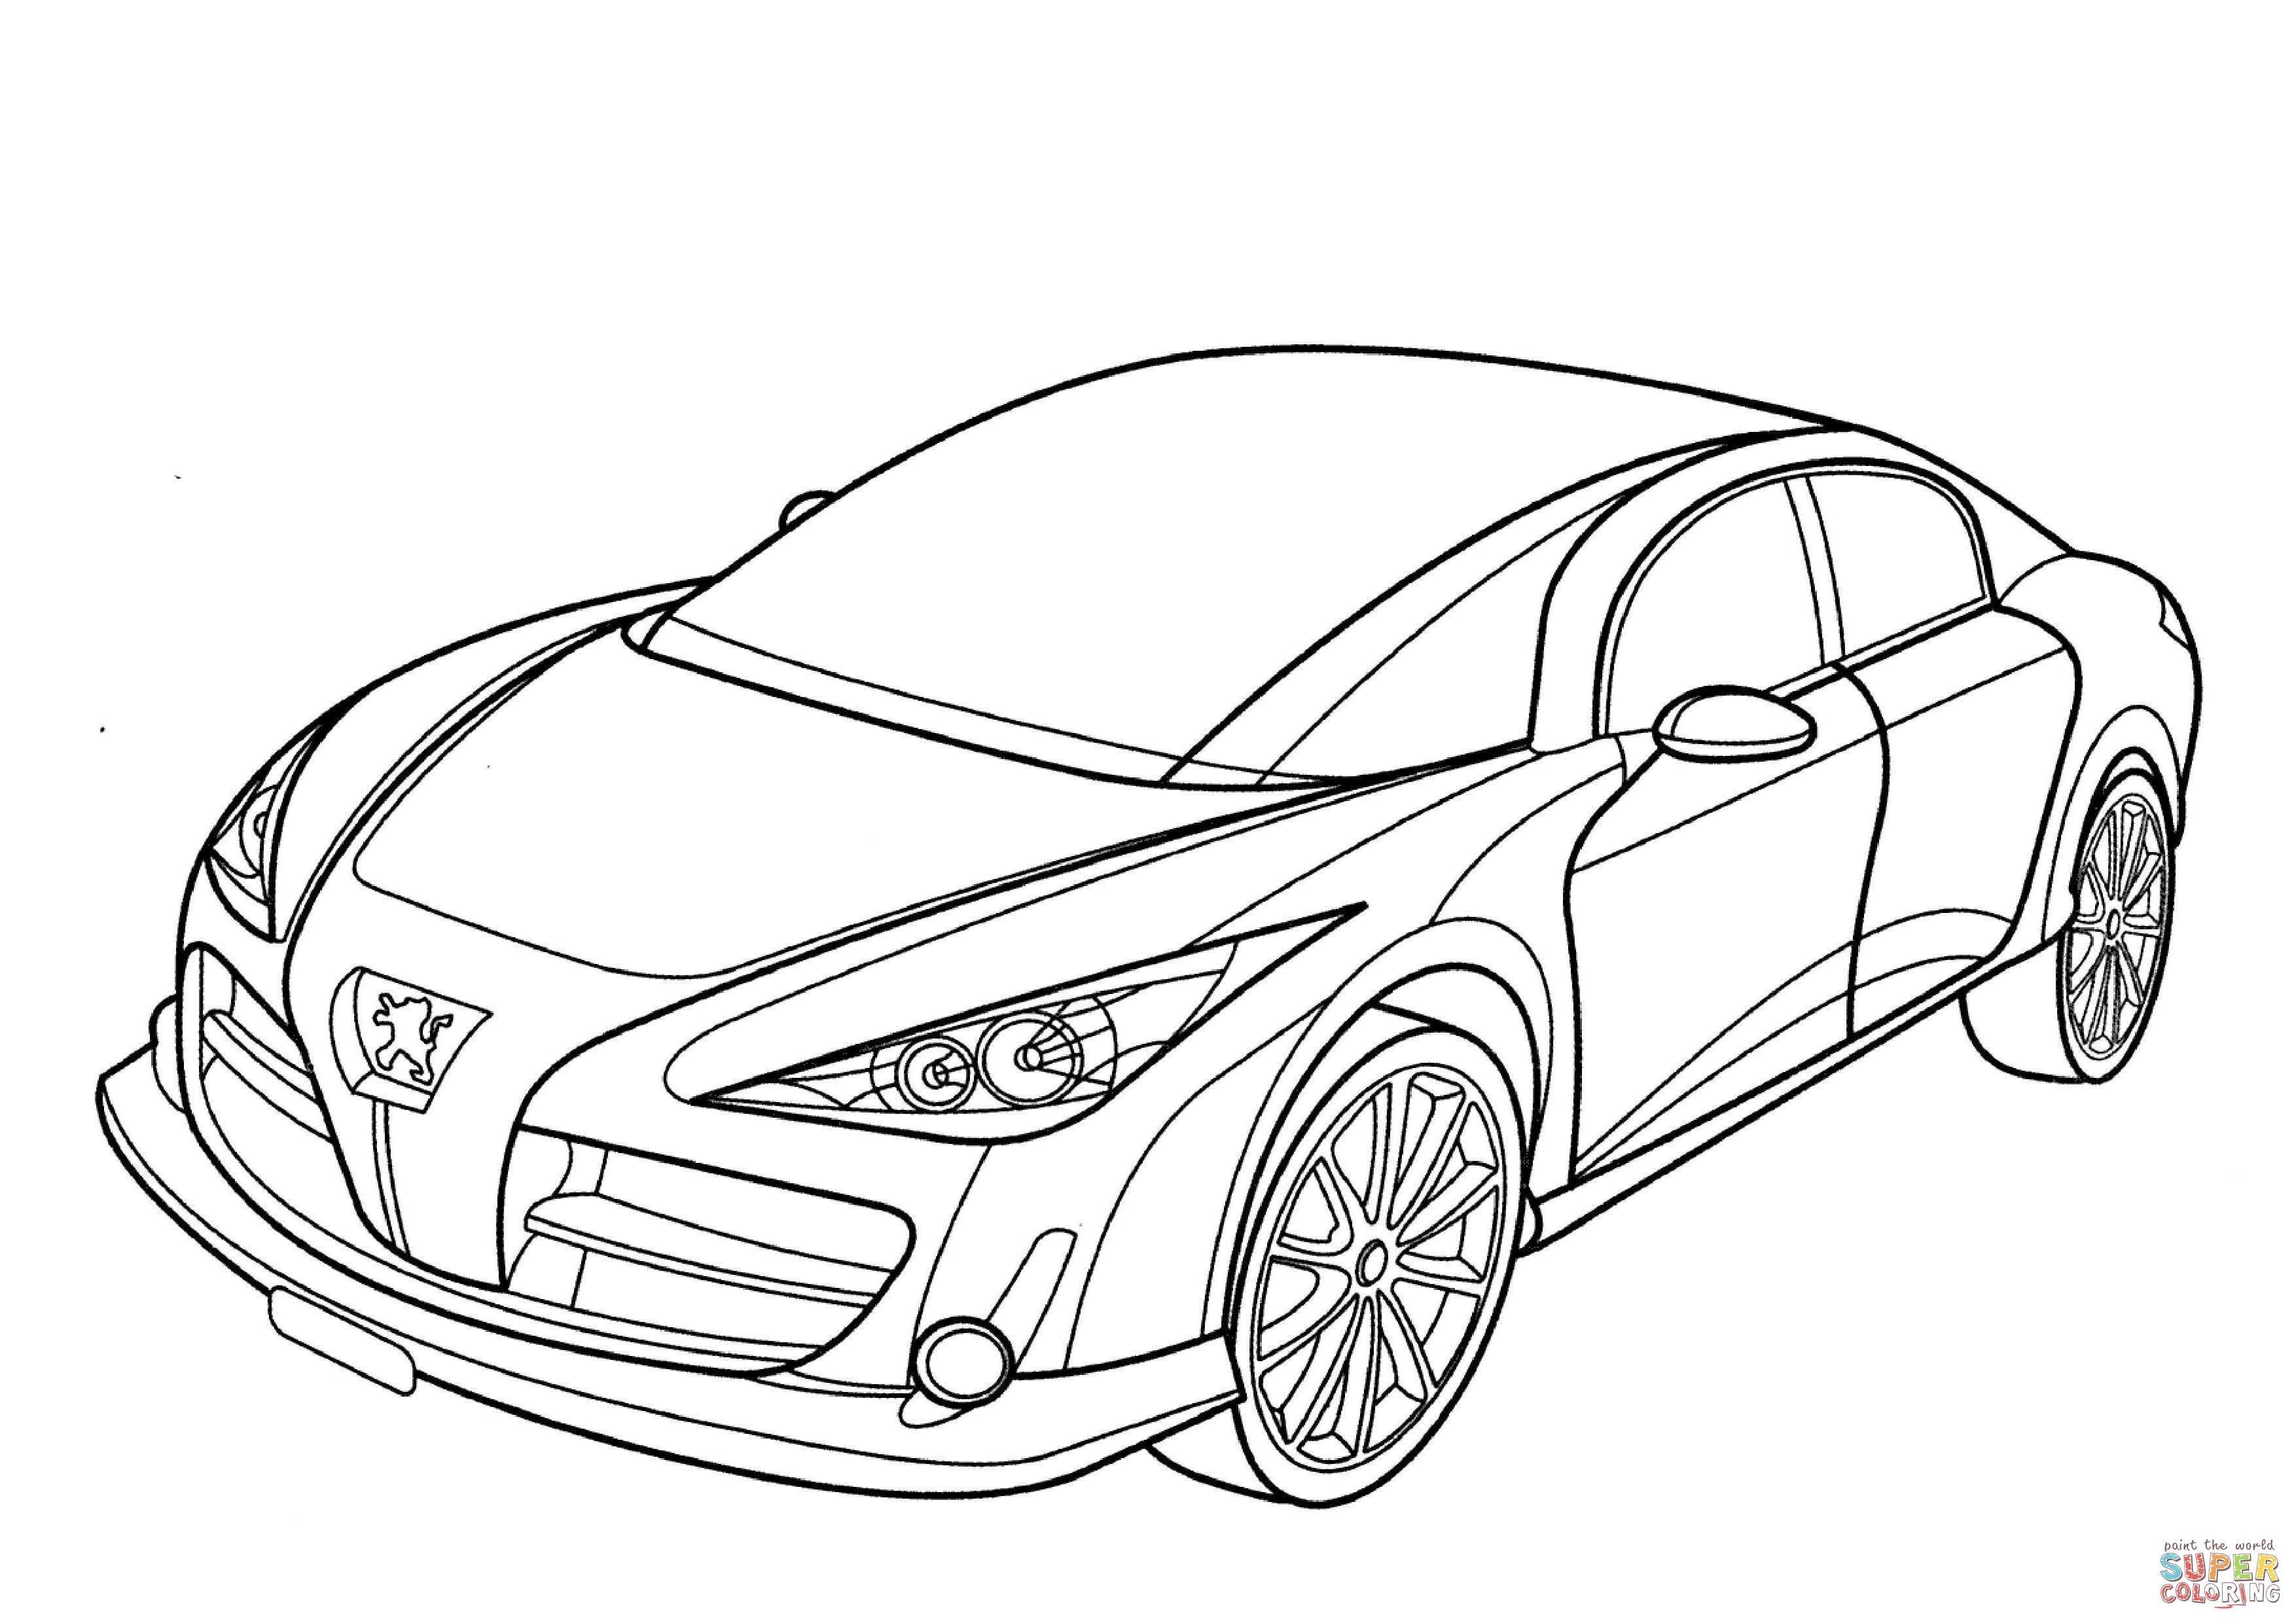 Animal Car Coloring Pages for Kindergarten